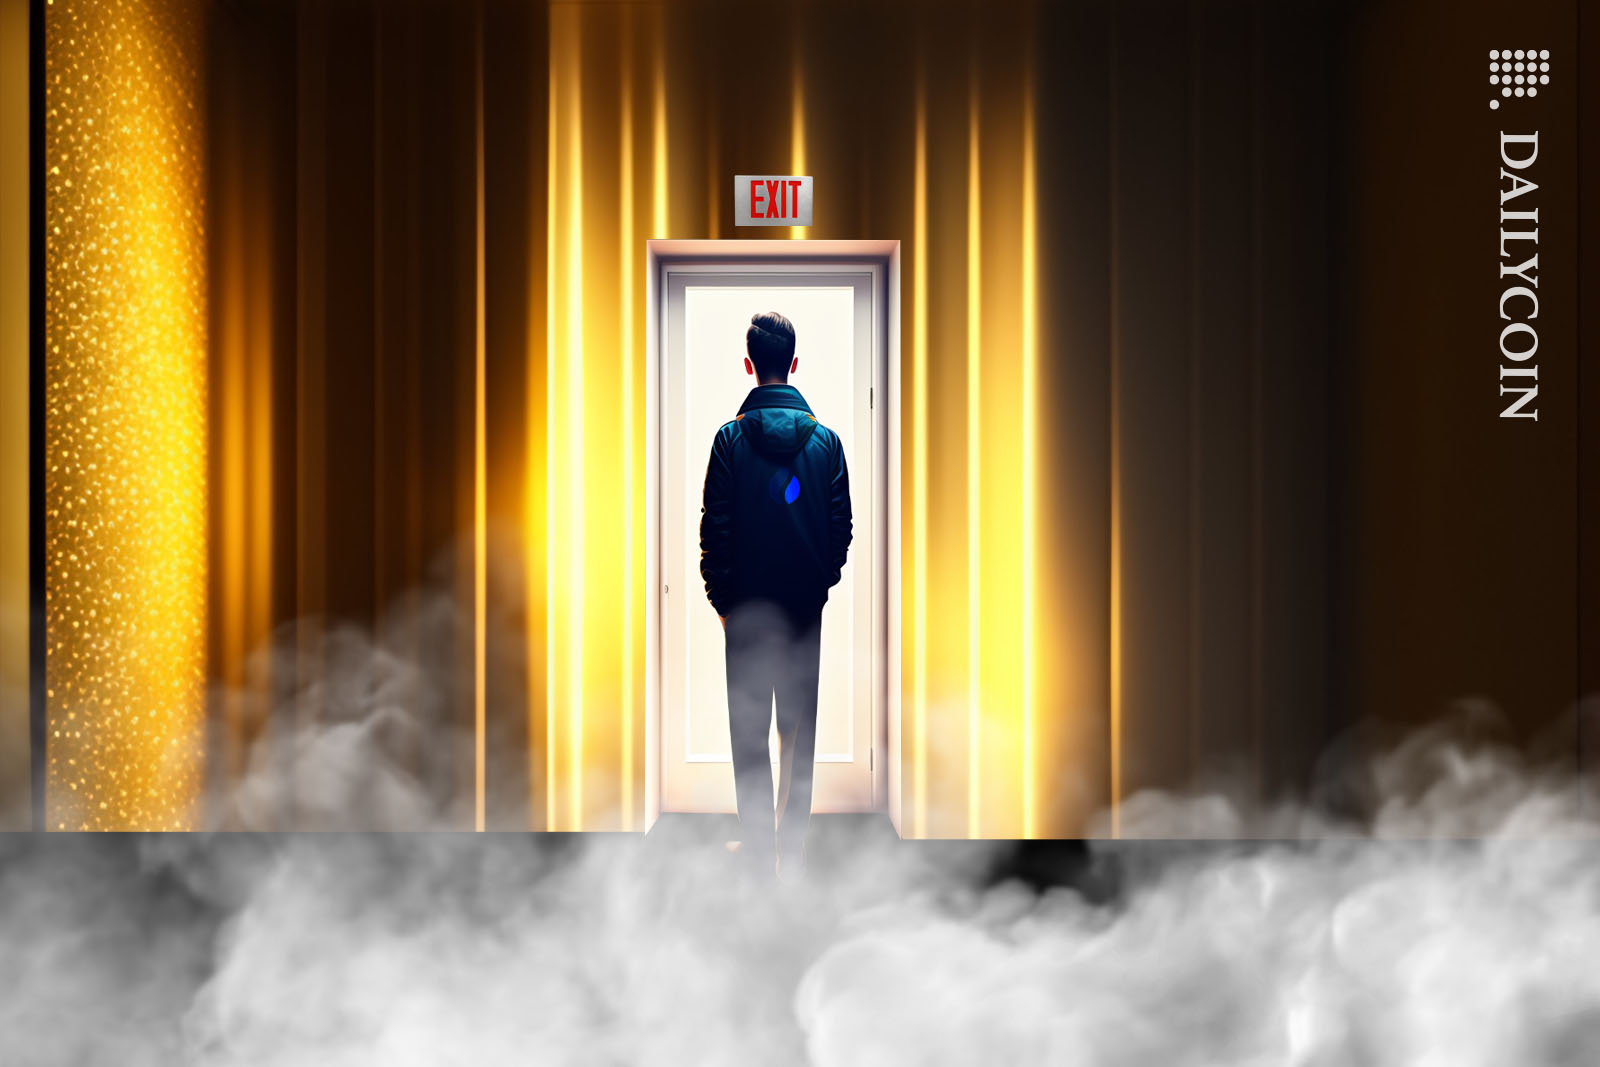 Man standing in front of a door, getting ready to exit the smoke filled room.